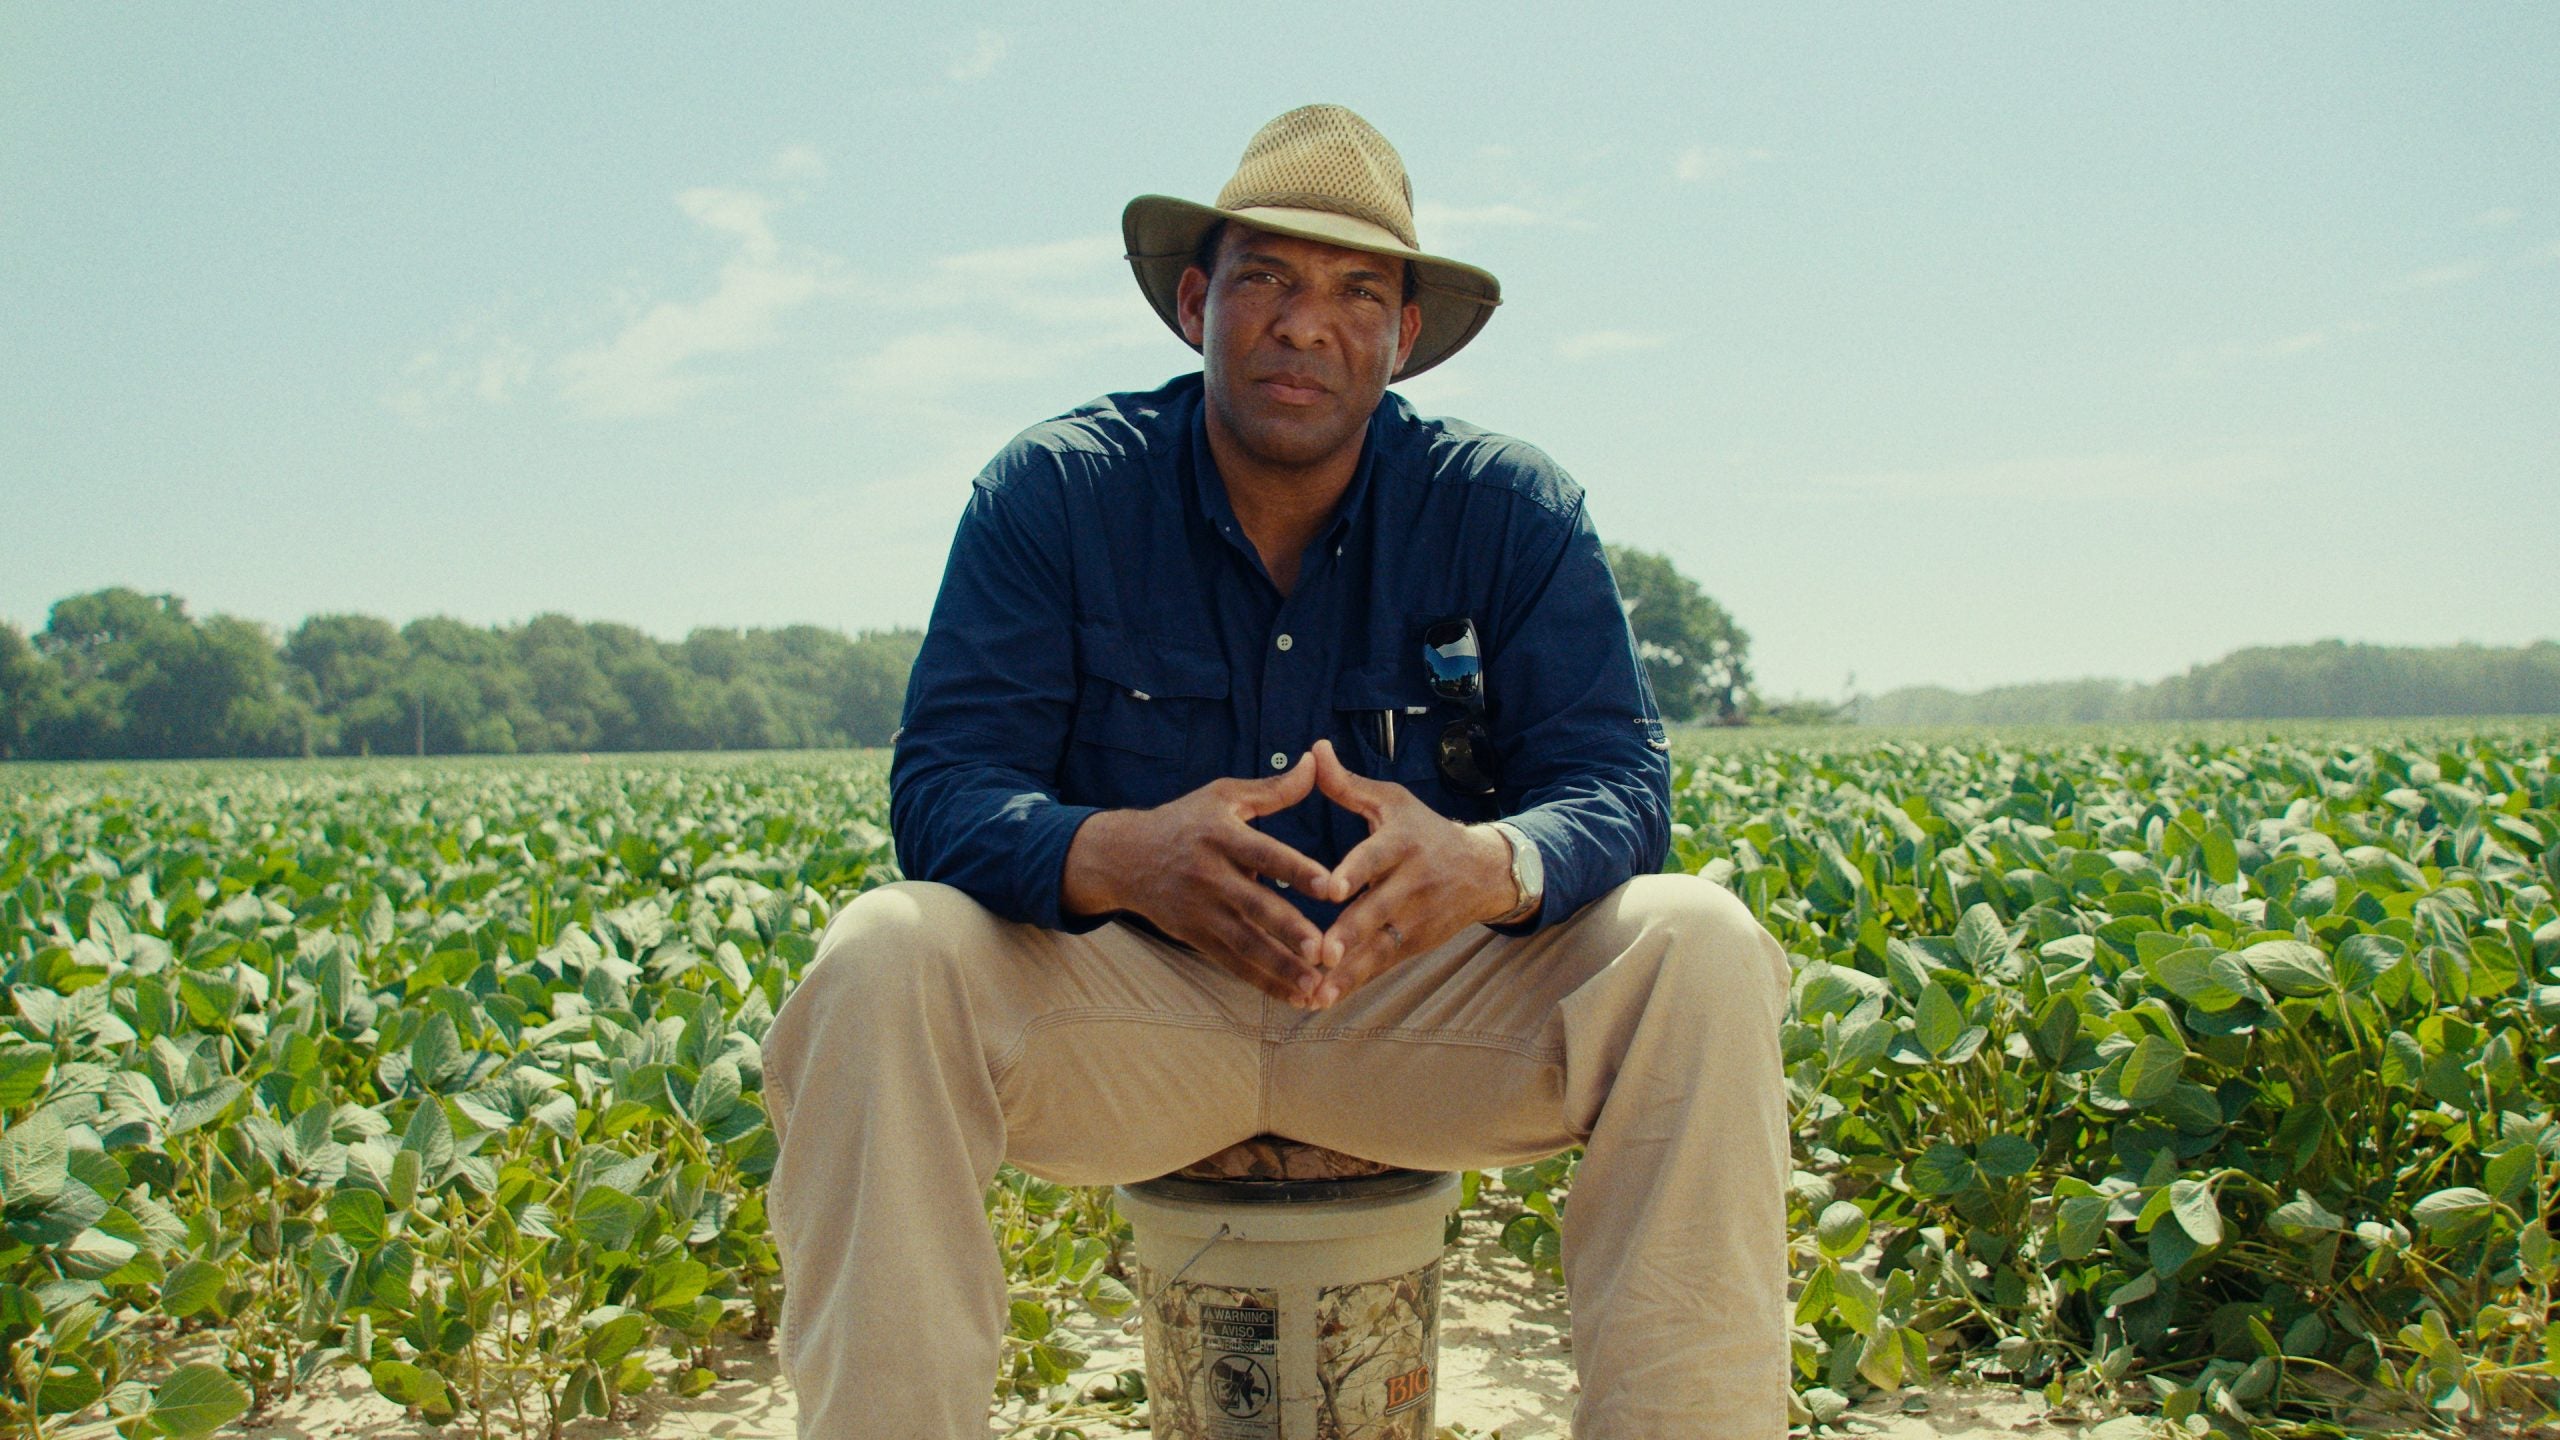 Black Farmers Have Lost Their Land At Alarming Rates. New Documentary Highlights Why And The Push For Preservation